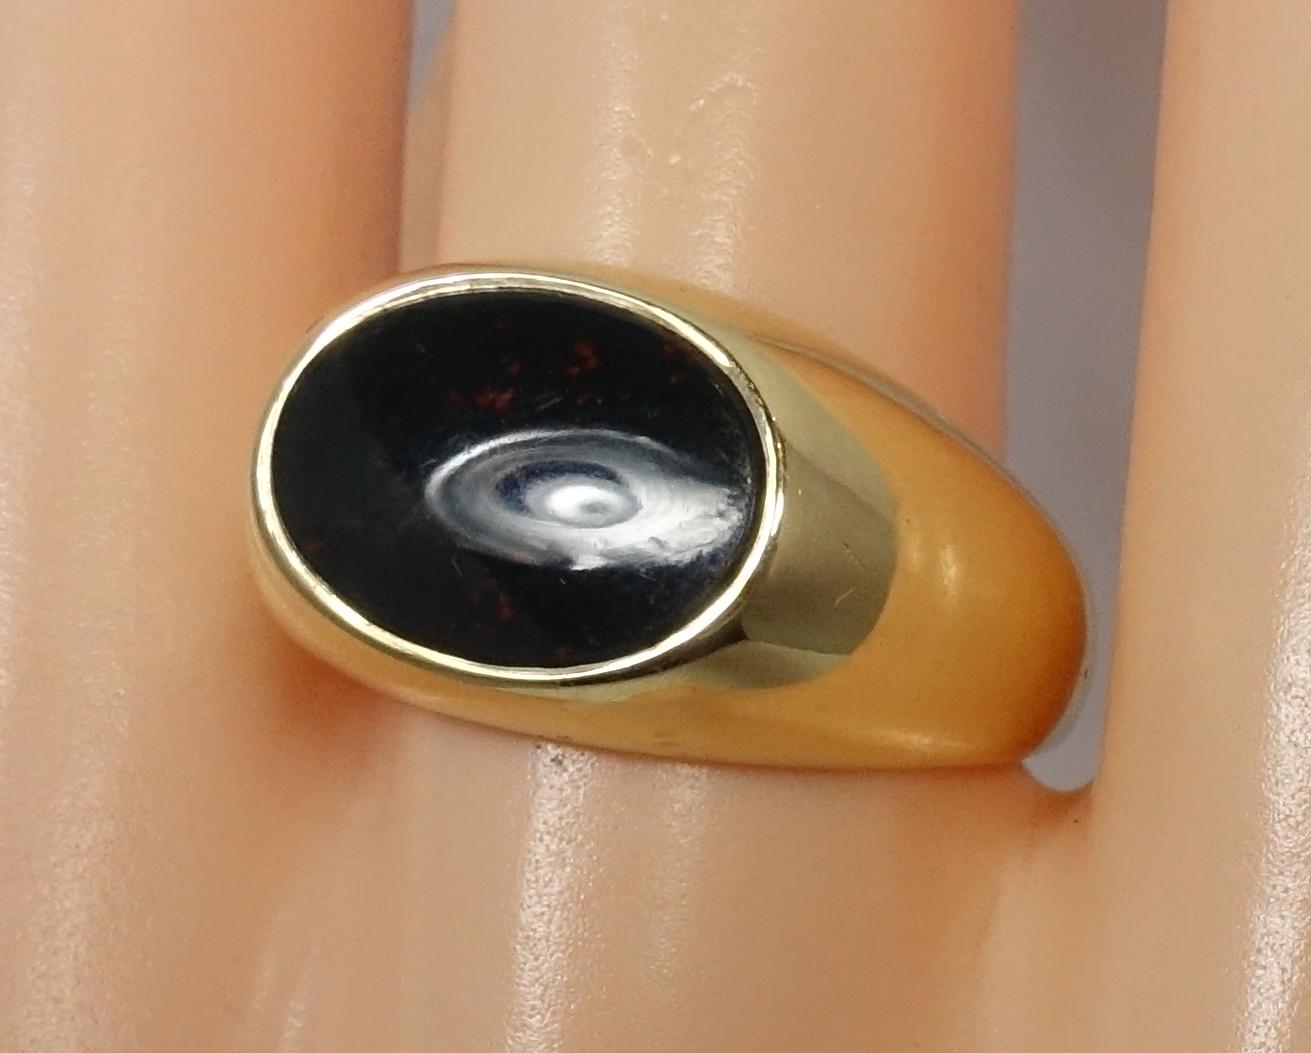 This vintage signed Tiffany ring features an oval cut bloodstone in a 14kt gold setting.  It’s a size 9 and measures 1/2” across the top.  It is signed “Tiffany & Co.” and is in excellent condition.